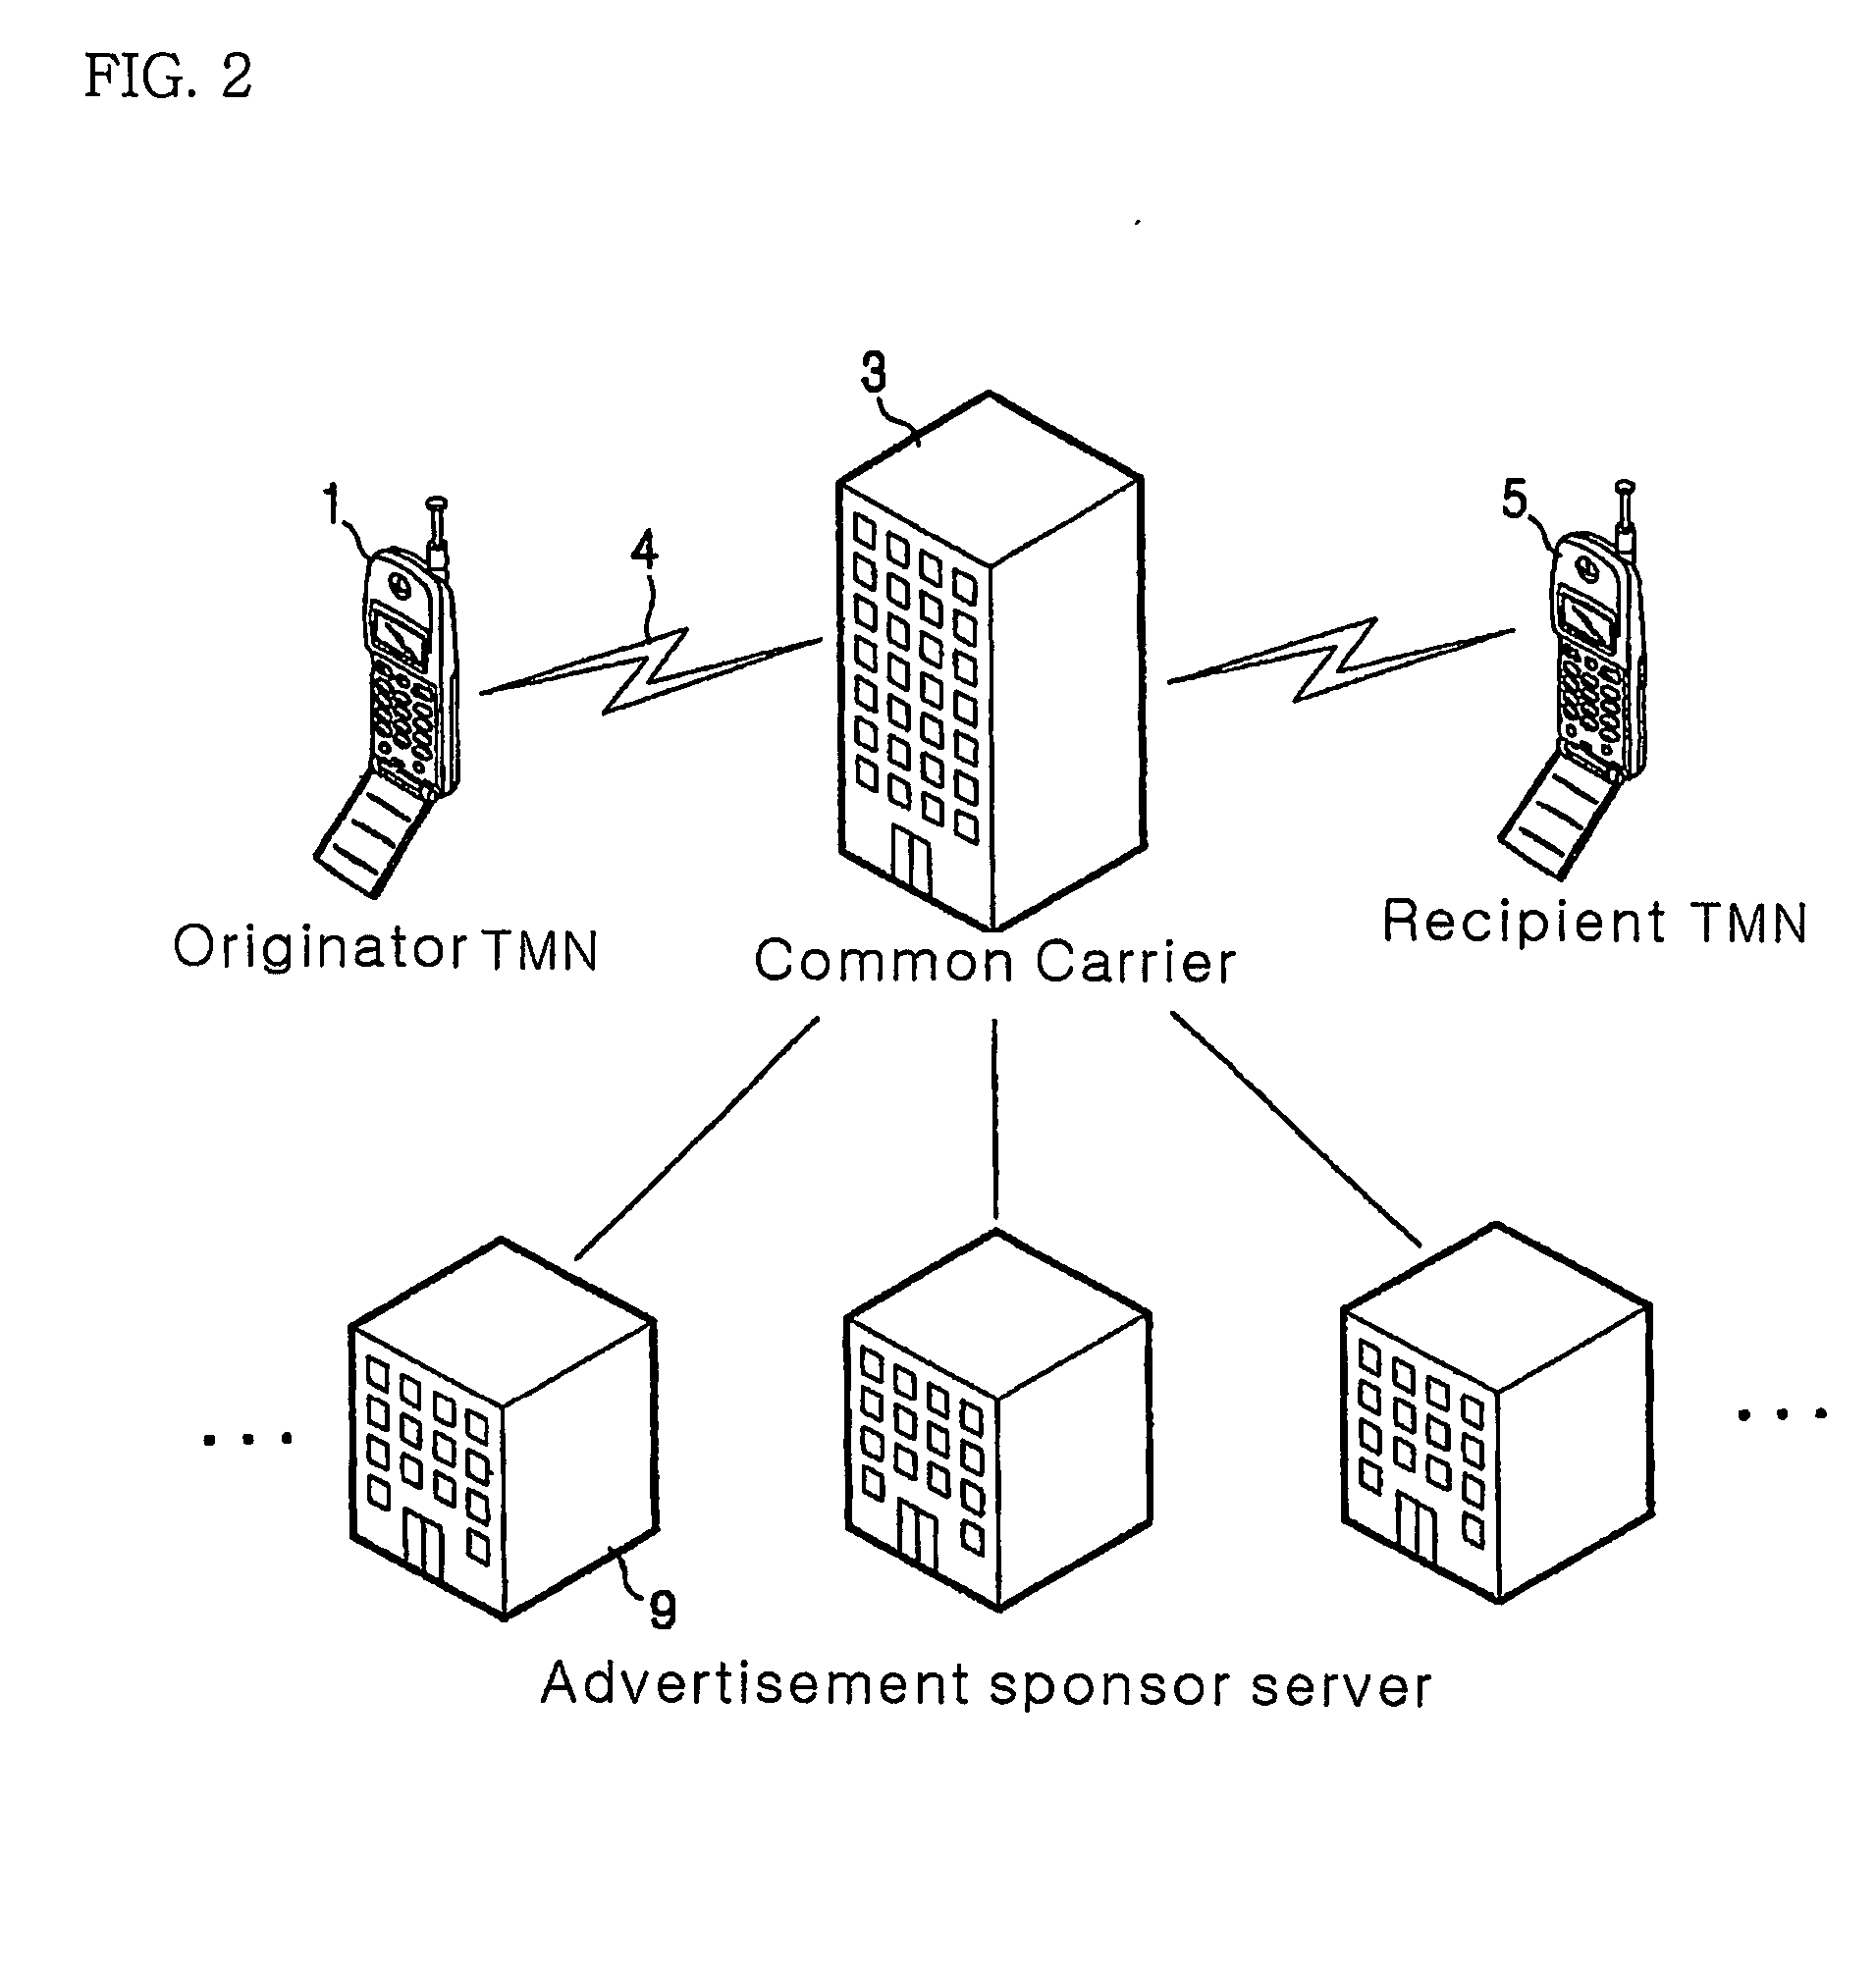 System and method for providing an advertisement service using the call-connecting signal